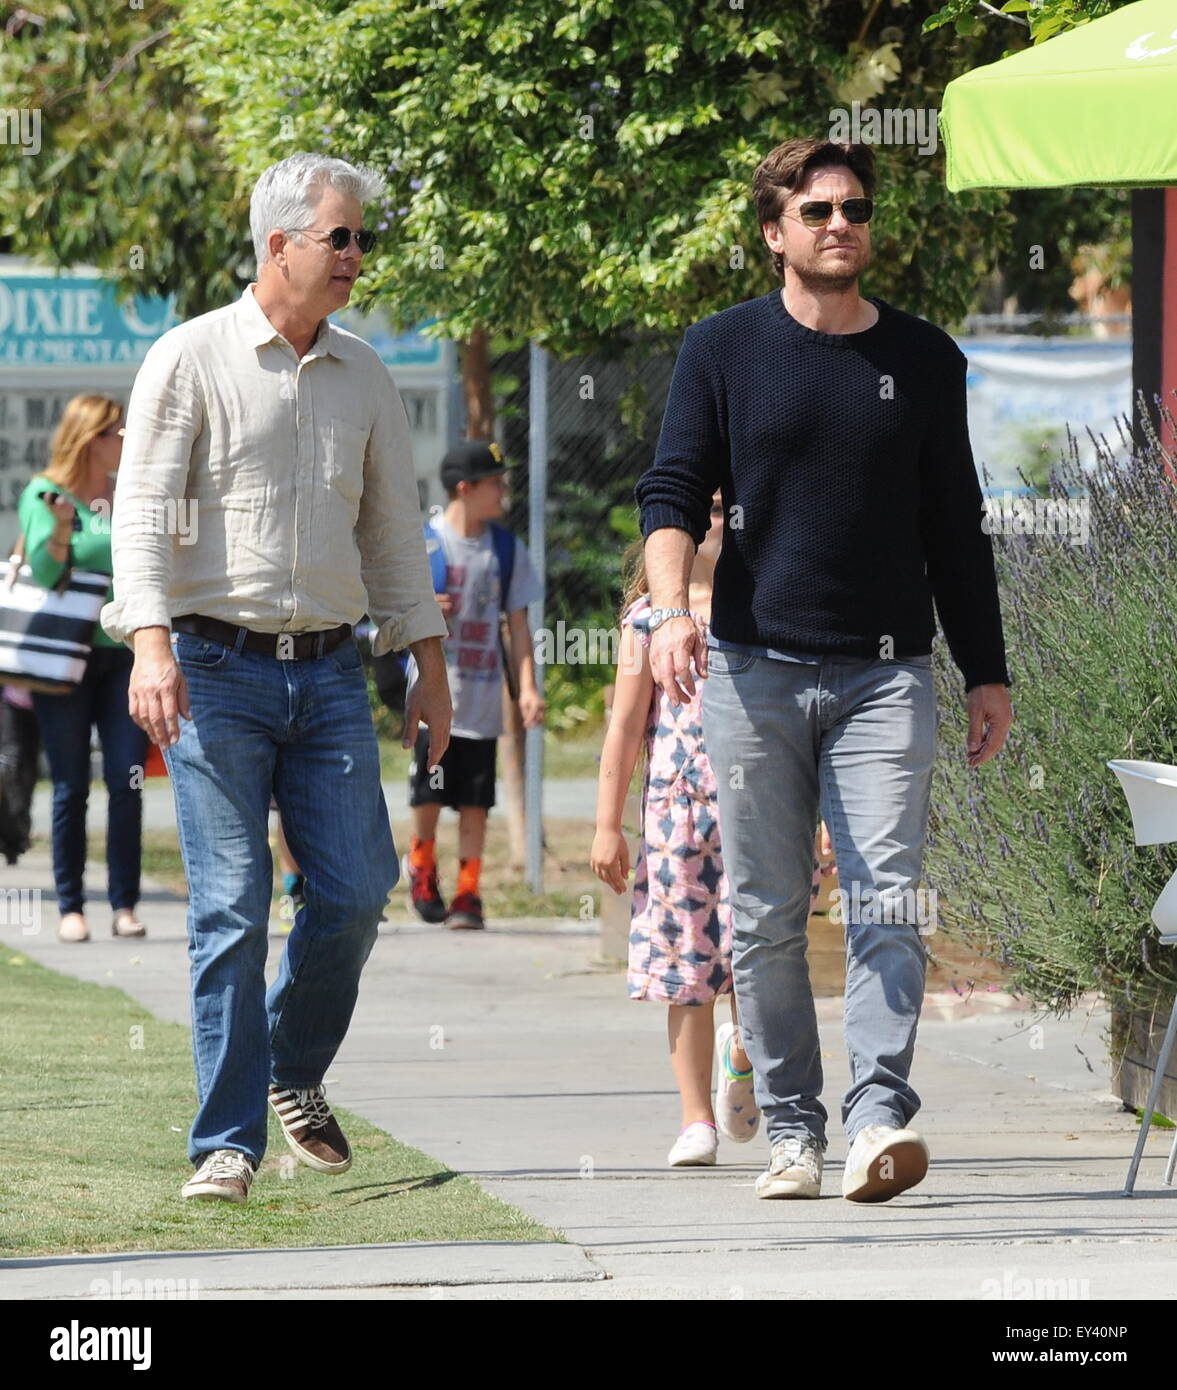 Actor Jason Bateman spending quality time with his dad Kent and